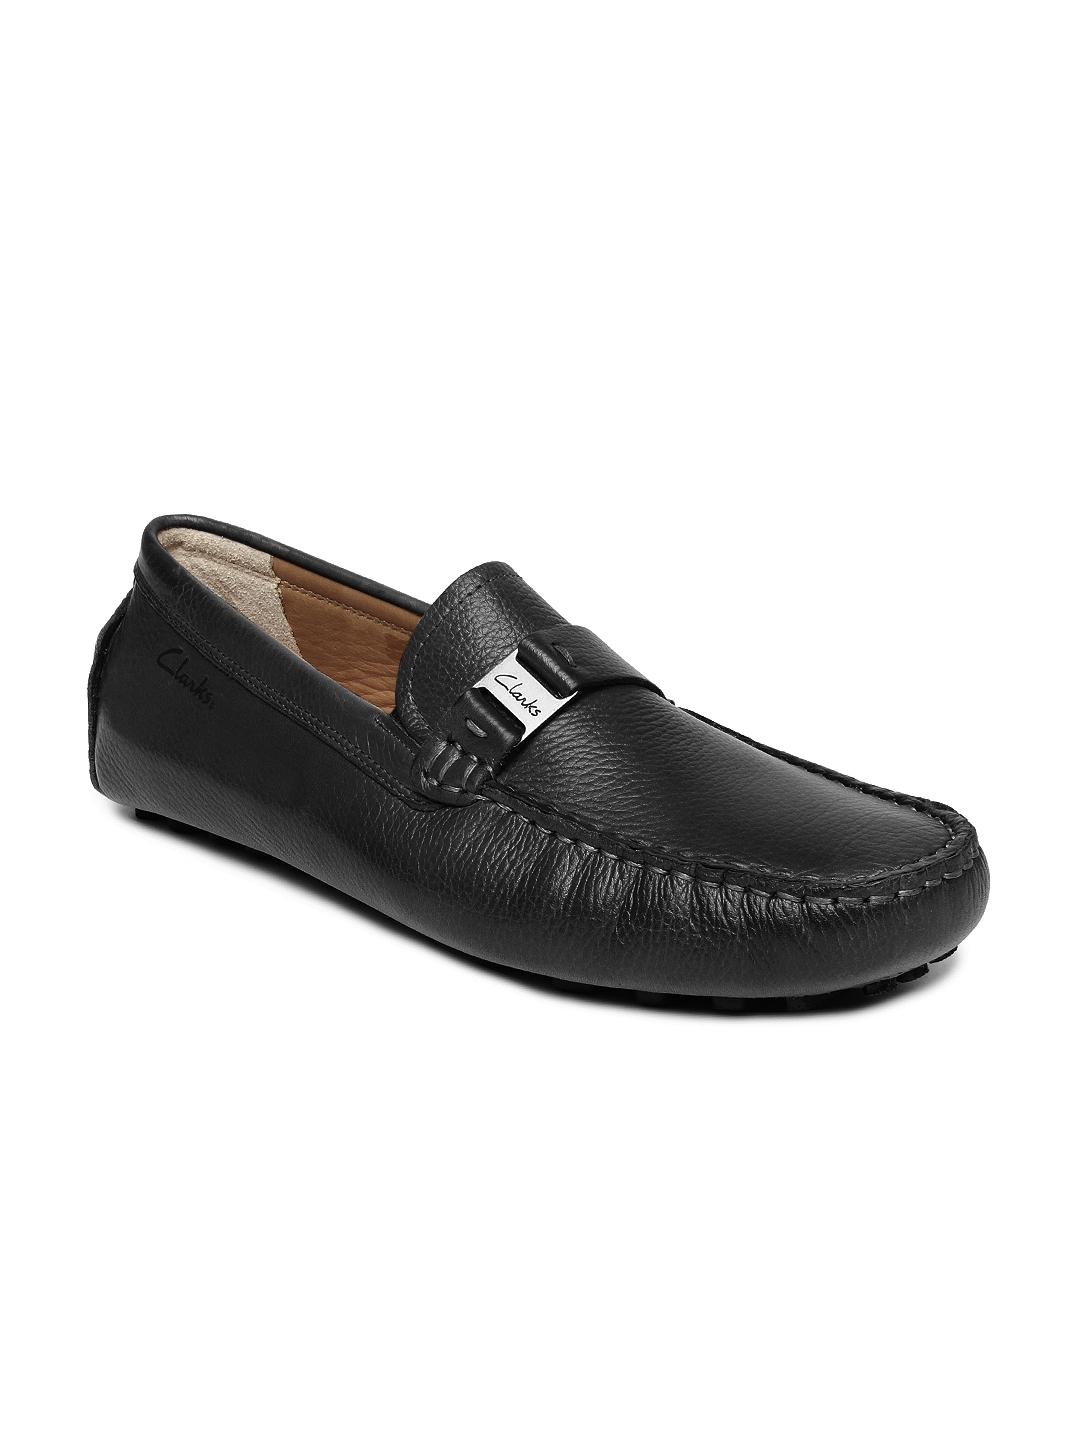 Buy Clarks Men Black Leather Driving Shoes - Casual Shoes for Men ...